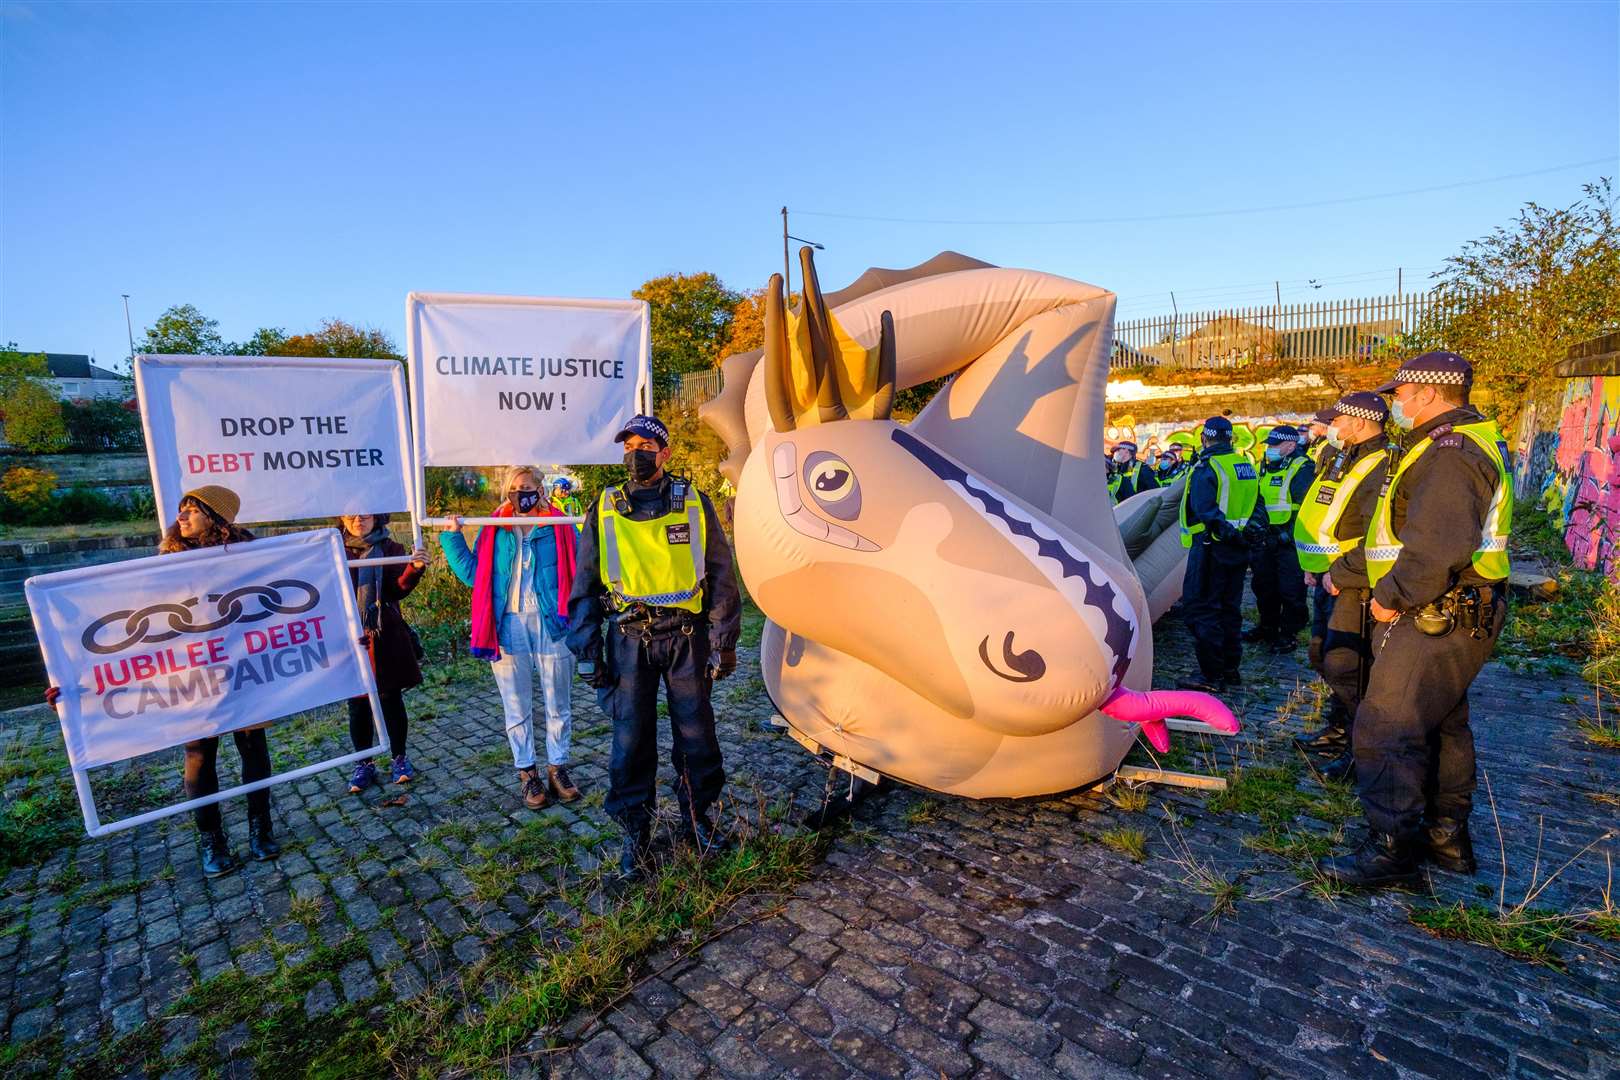 The Jubilee Debt Campaign had planned to launch its ‘Loch Ness Debt Monster’ to call for lower income countries to receive funding for tackling climate change as grants, rather than loans which would add to their debt piles (Jess Hurd/PA)